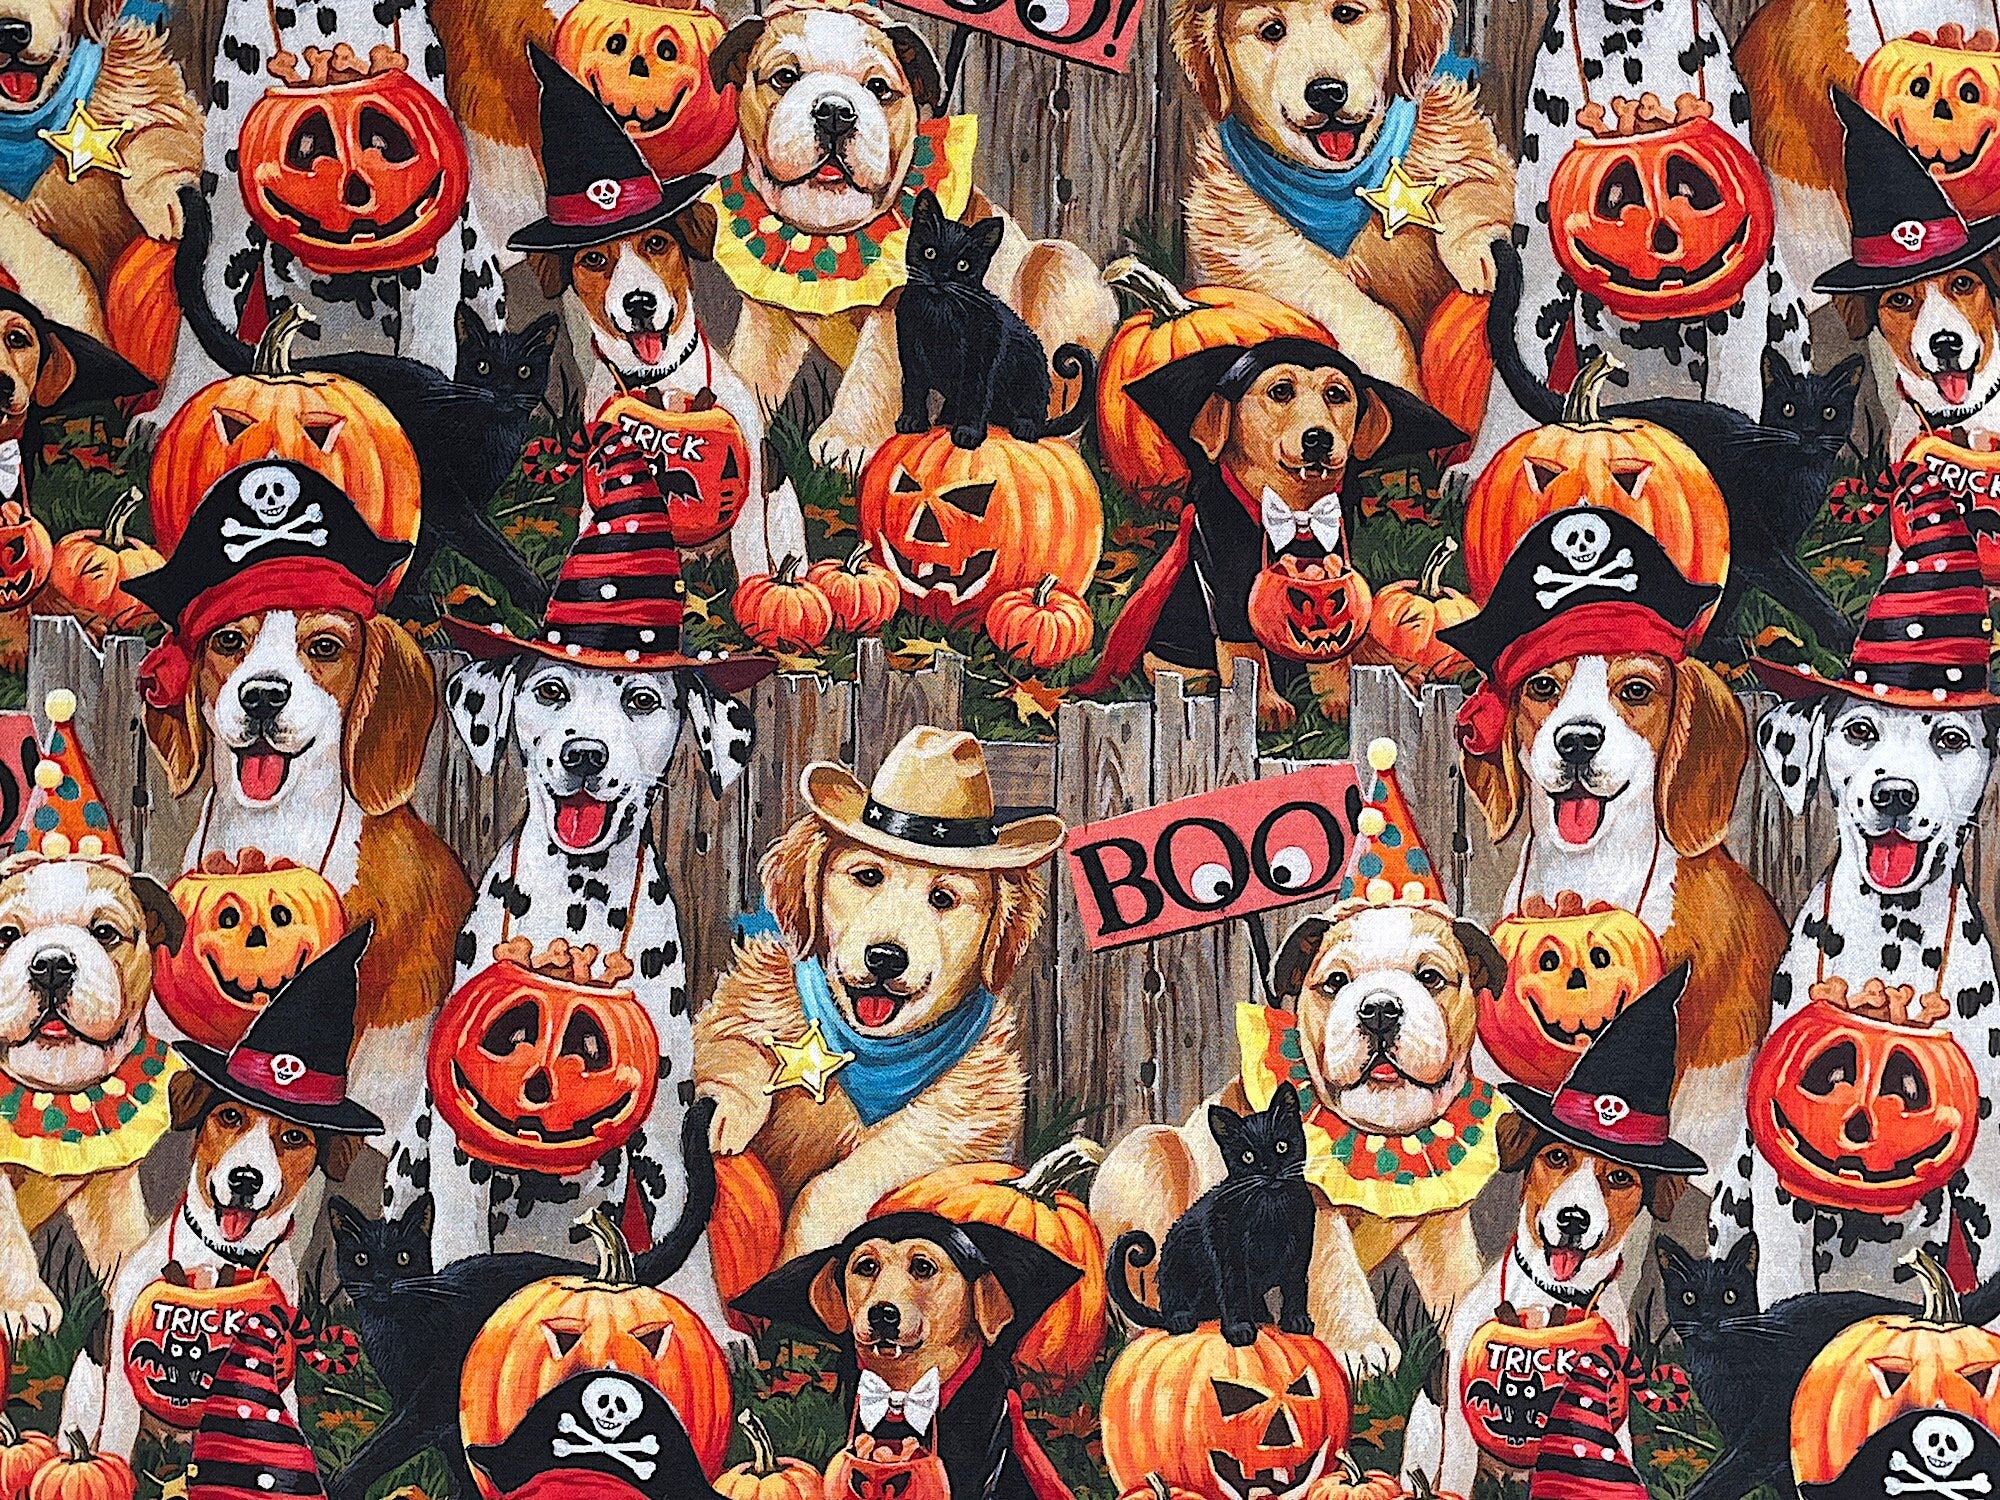 Cotton fabric covered with dogs wearing Halloween costumes.